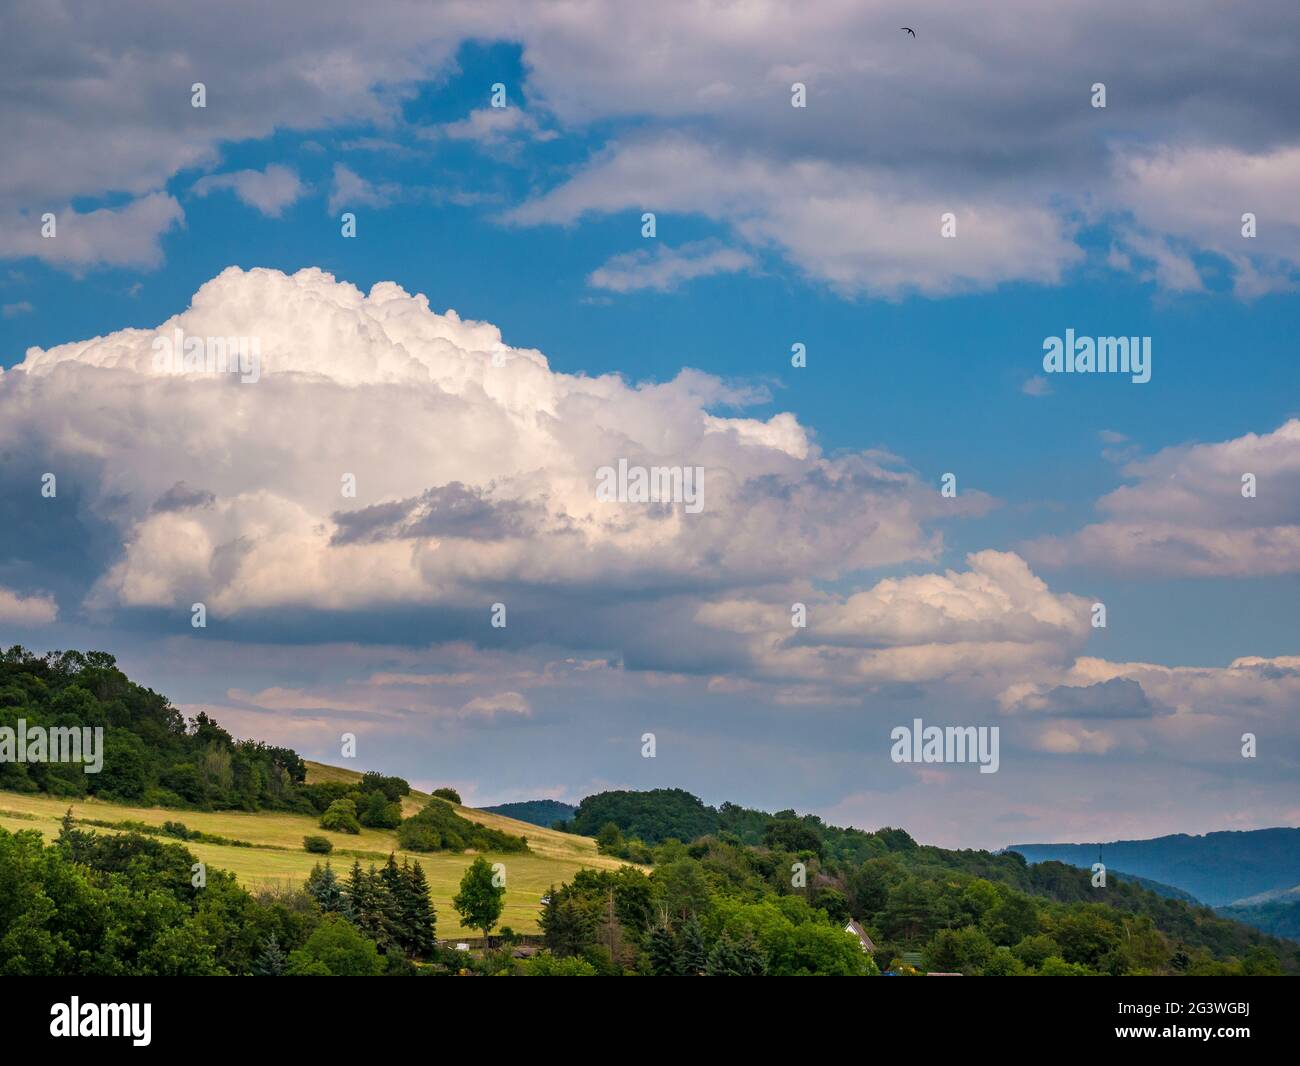 Massive rain clouds forming in the blue sky over hilly landscape Stock Photo